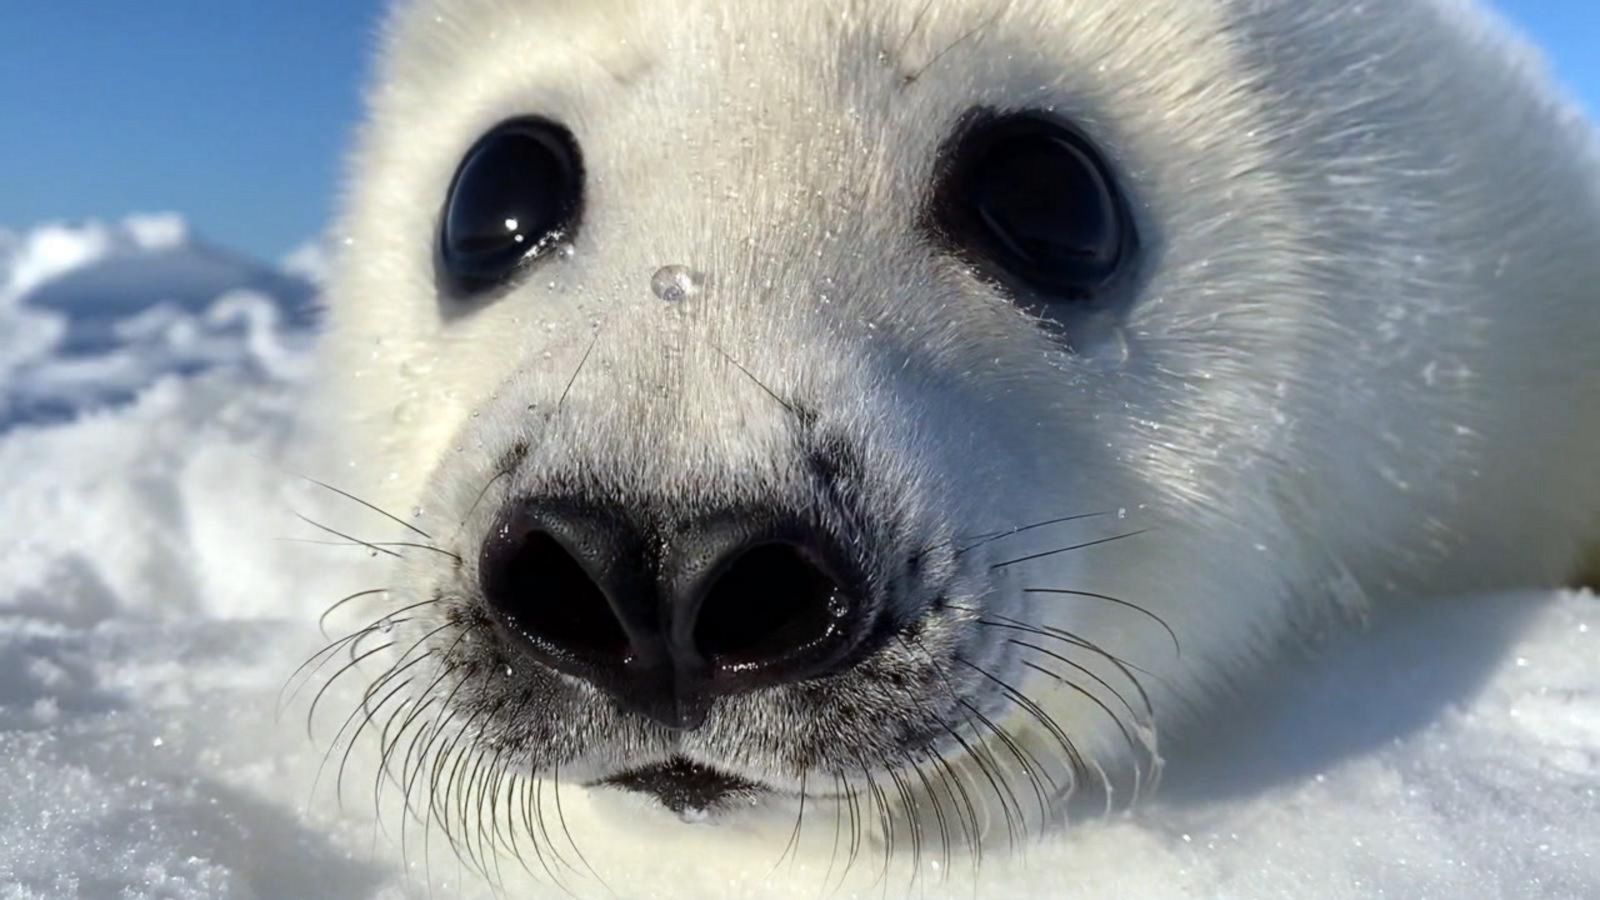 Extraordinary Earth: How harp seal pups rely on ice floes in the Northwest Atlantic